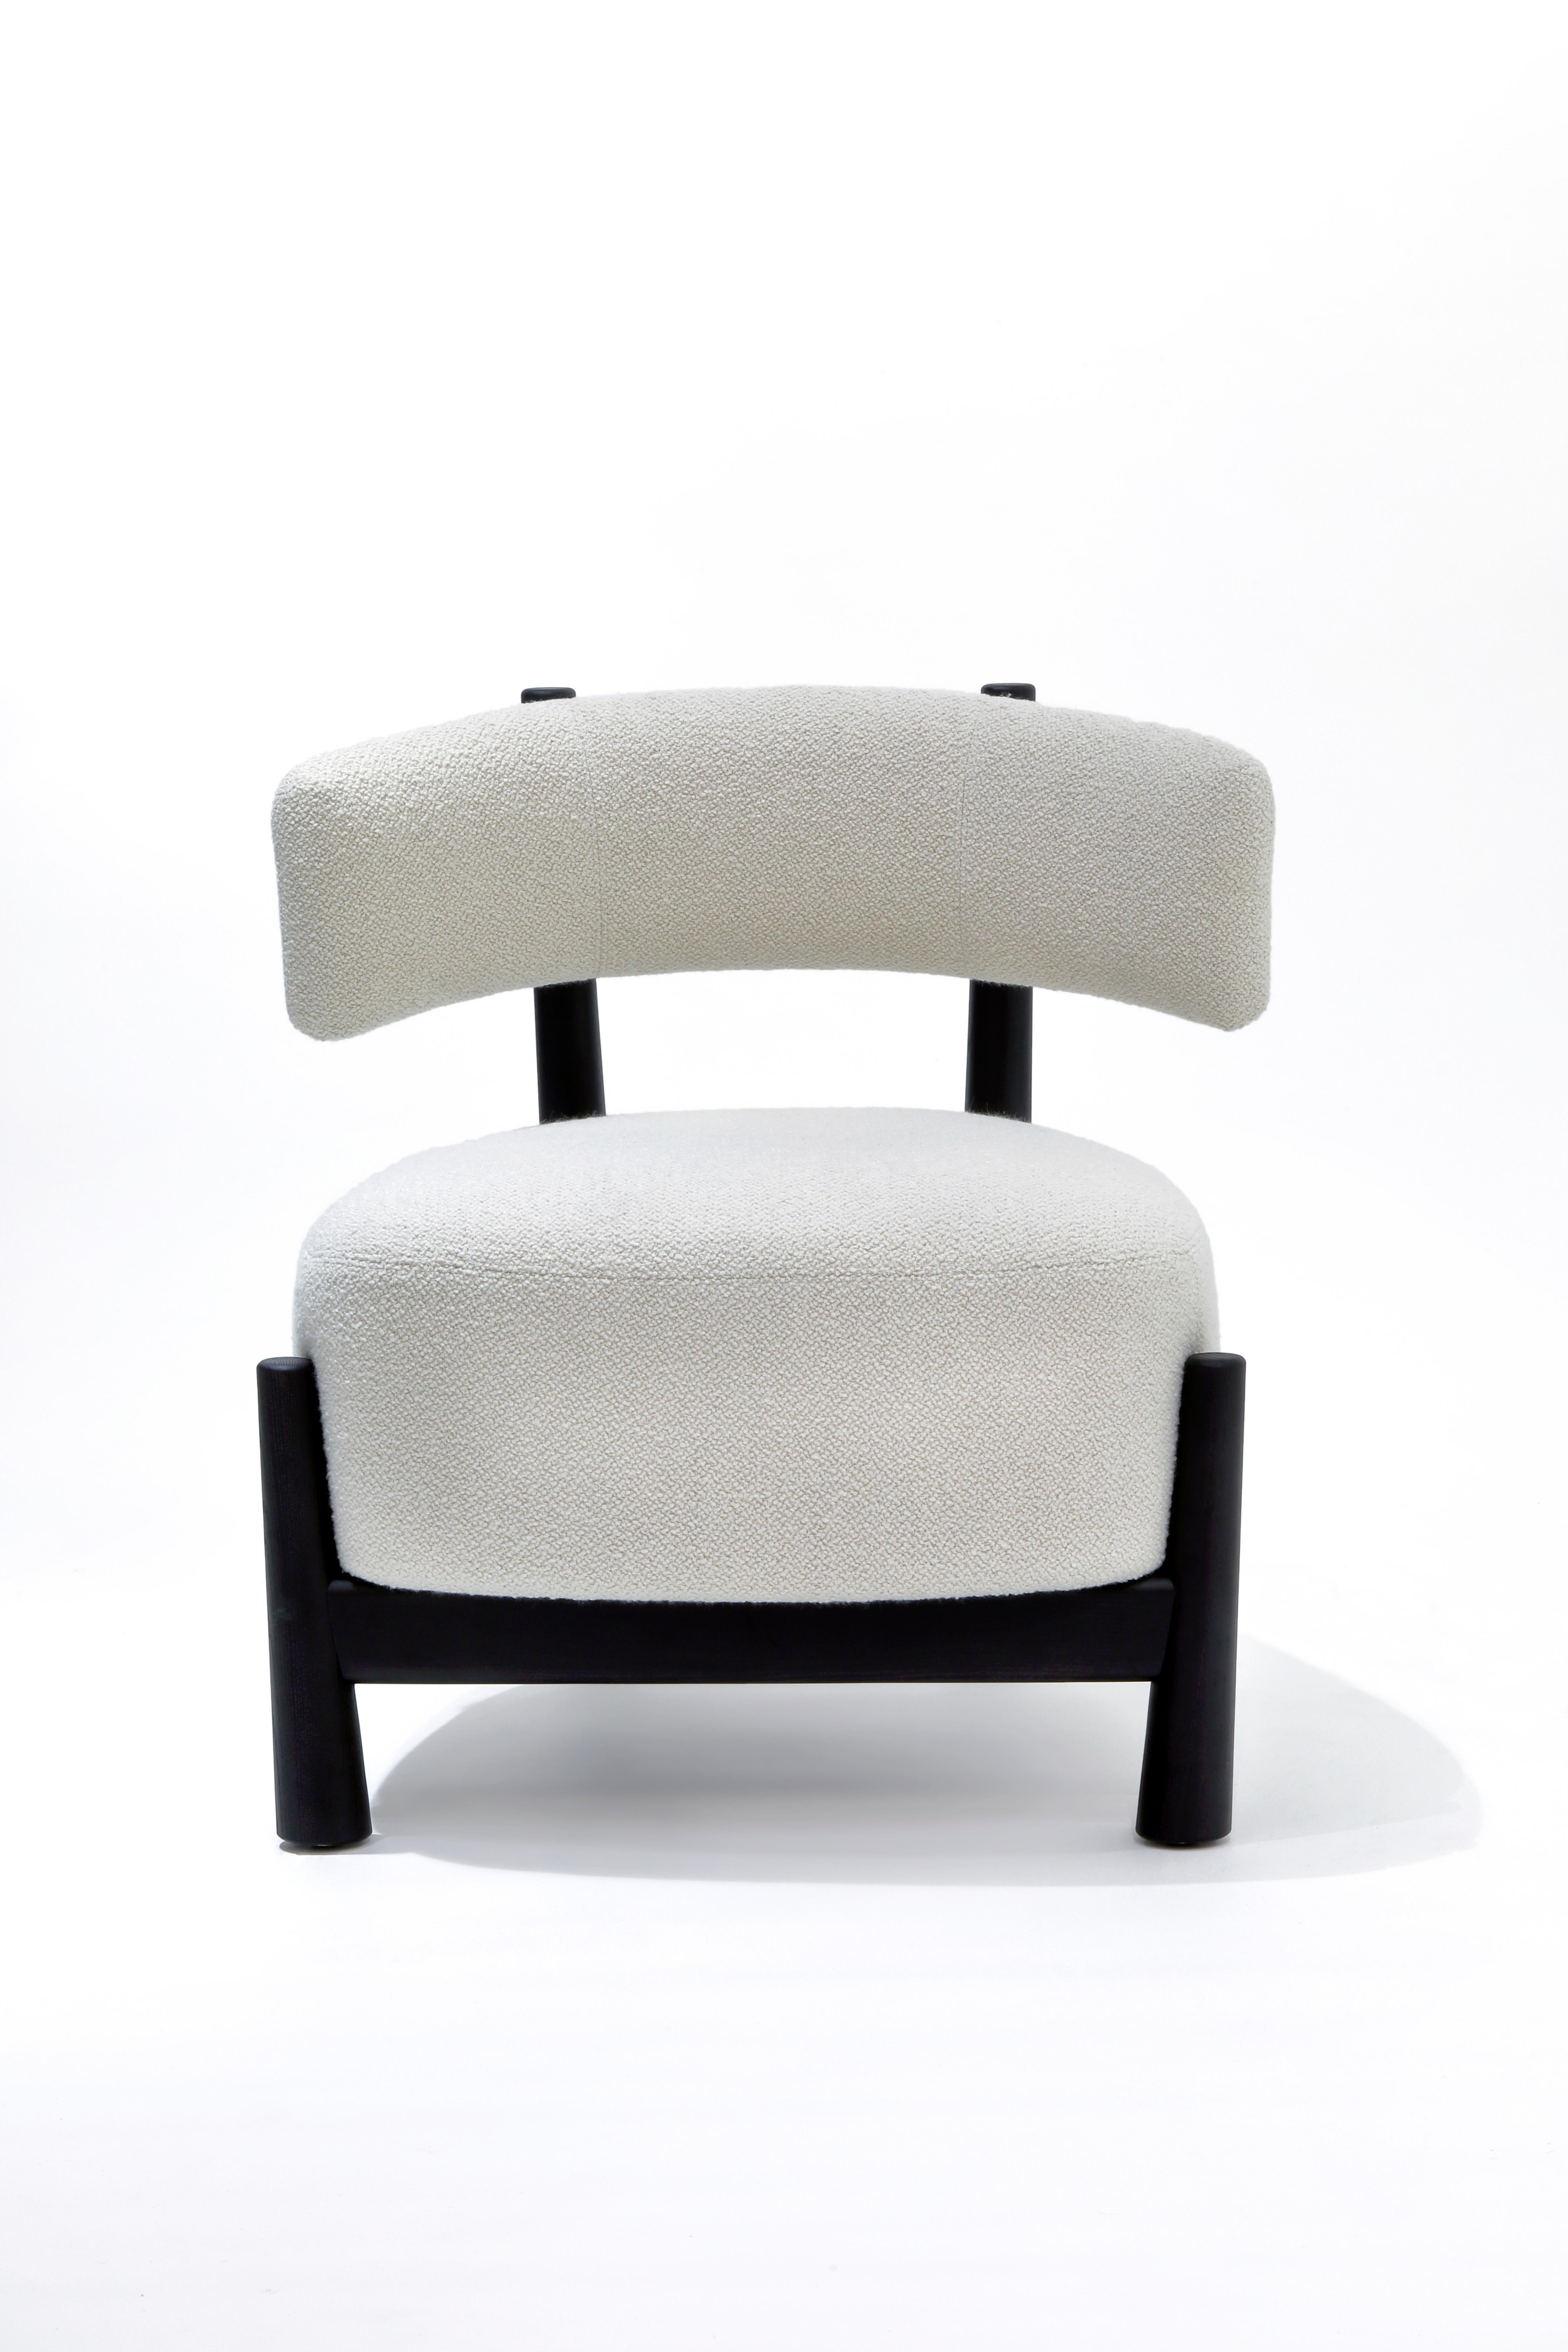 Ash Dalya armchair by Patricia Urquiola
Materials: Solid ash or solid beech.
Technique: Blacked stained ash or coral lacquered beech. Seat and back in polyurethane foam of different densities, upholstered in fabric.
Dimensions: D 70 x W 68 x H 72